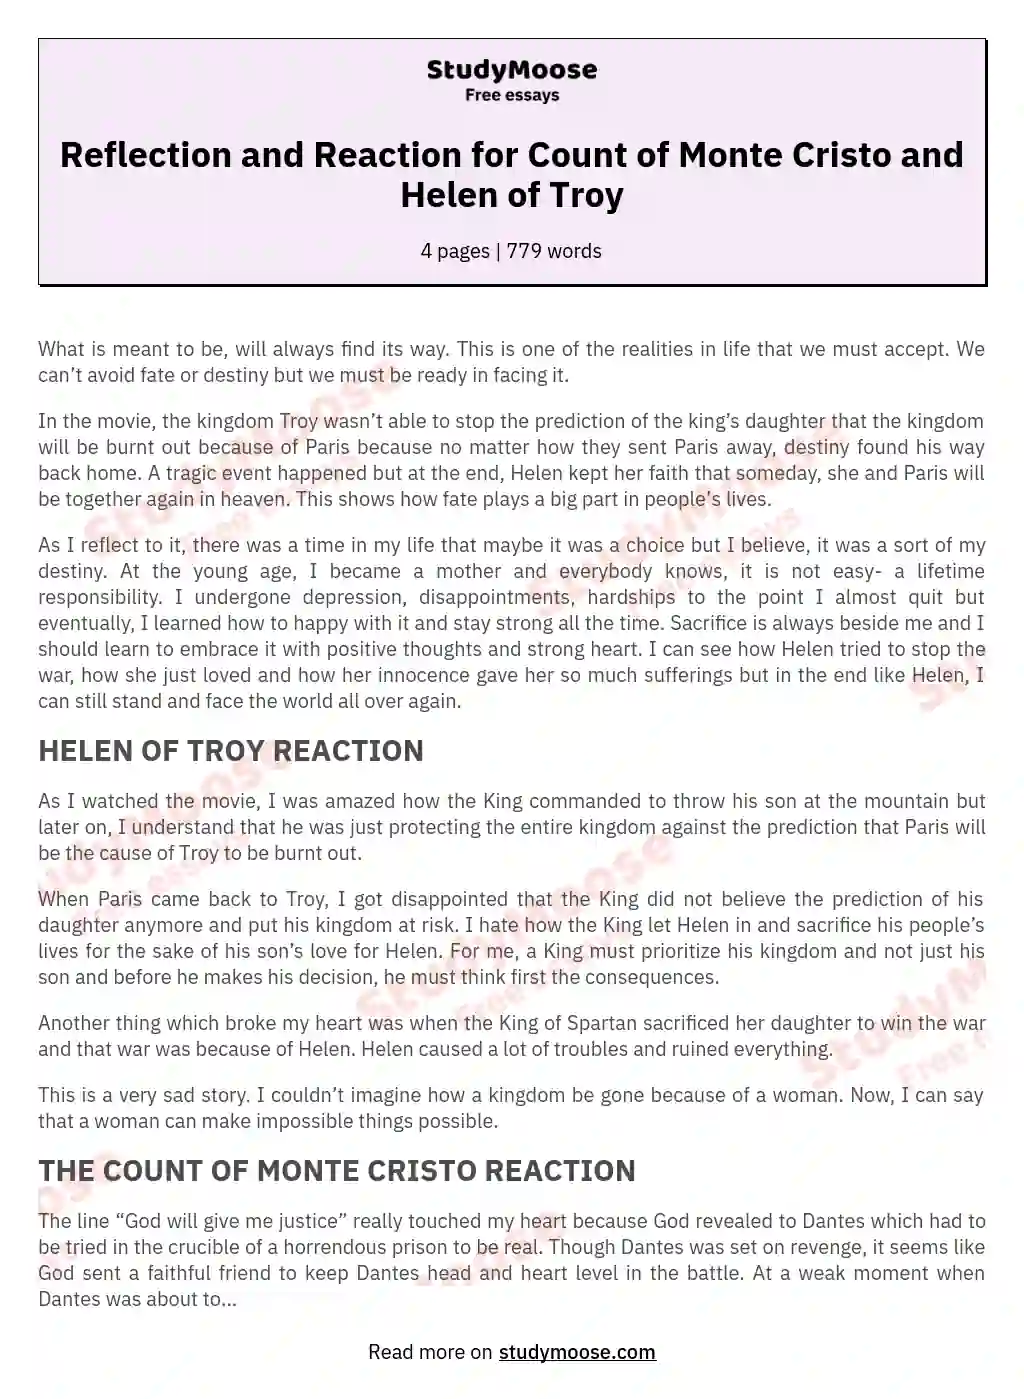 Reflection and Reaction for Count of Monte Cristo and Helen of Troy essay